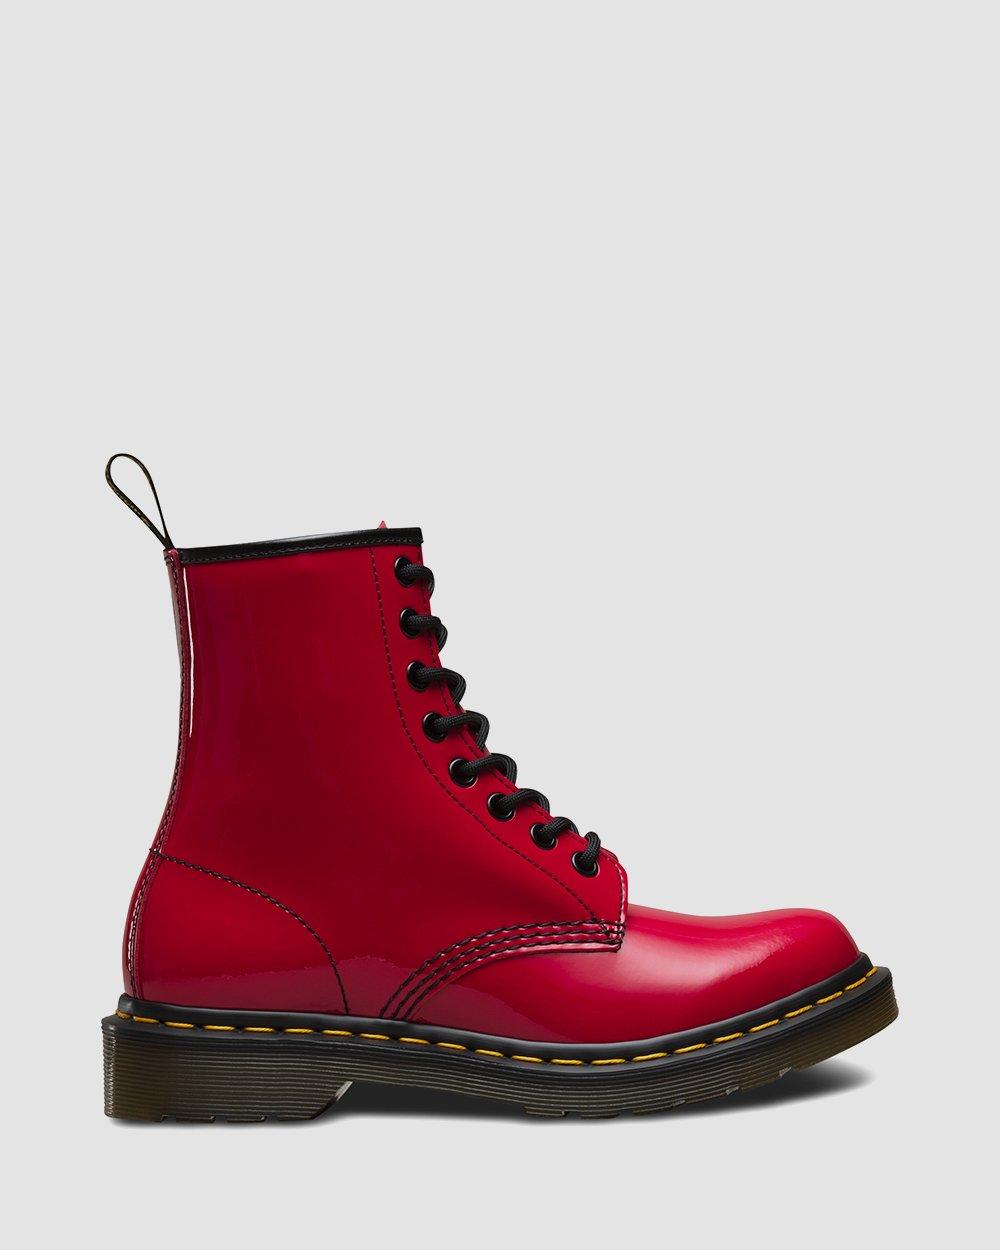 1460 Women's Patent Leather Lace Up Boots in Red